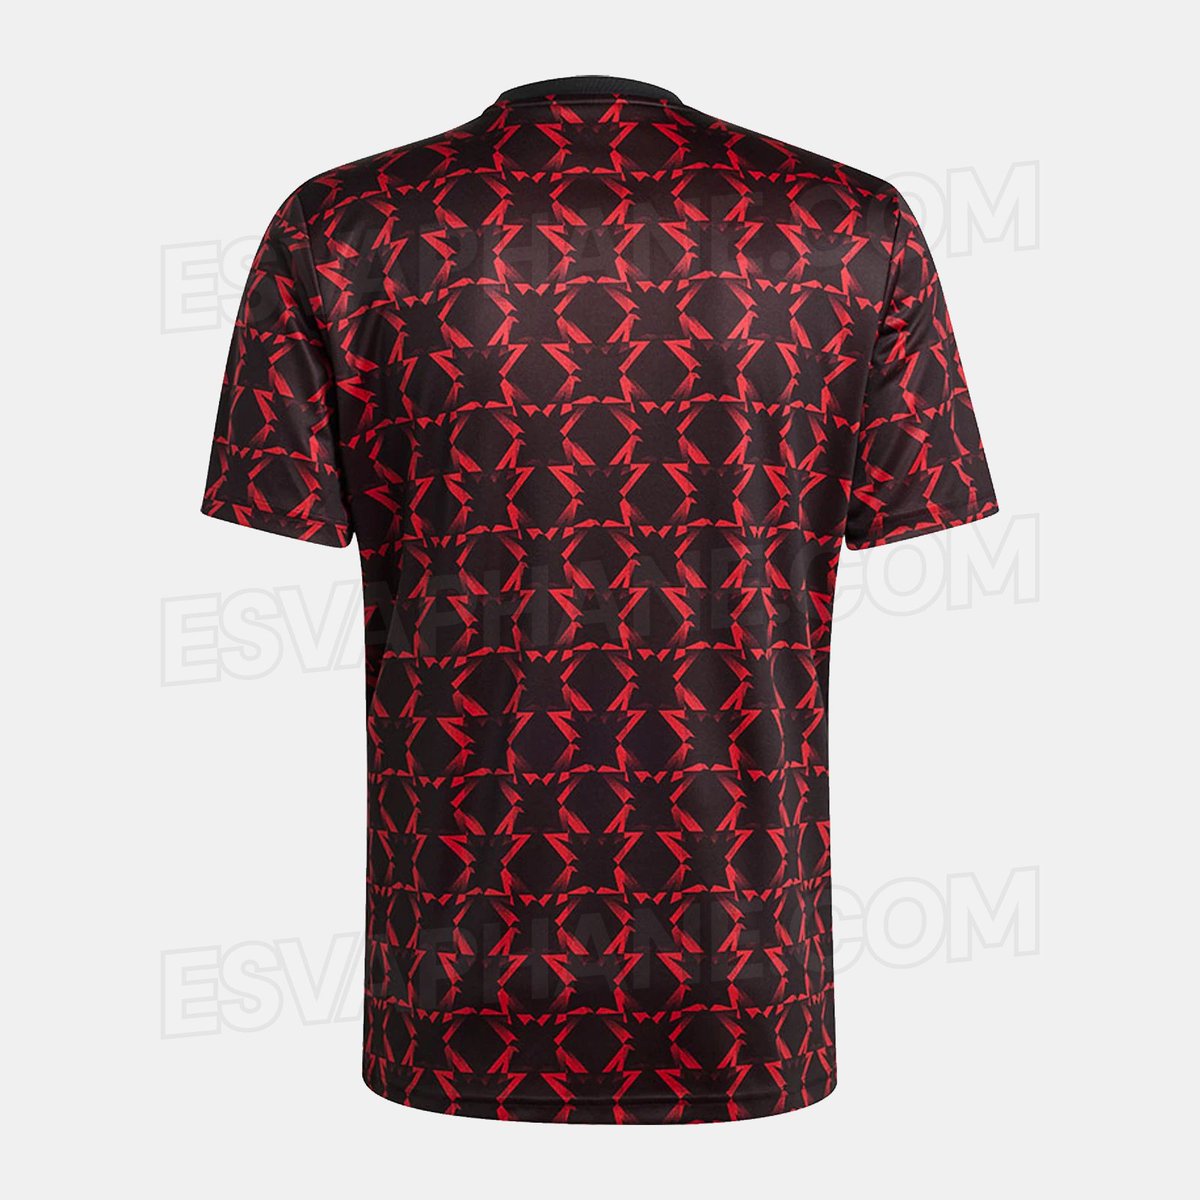 💥 LEAKED 💥 🟥⚫️ Manchester United 24-25 Pre-Match Shirt